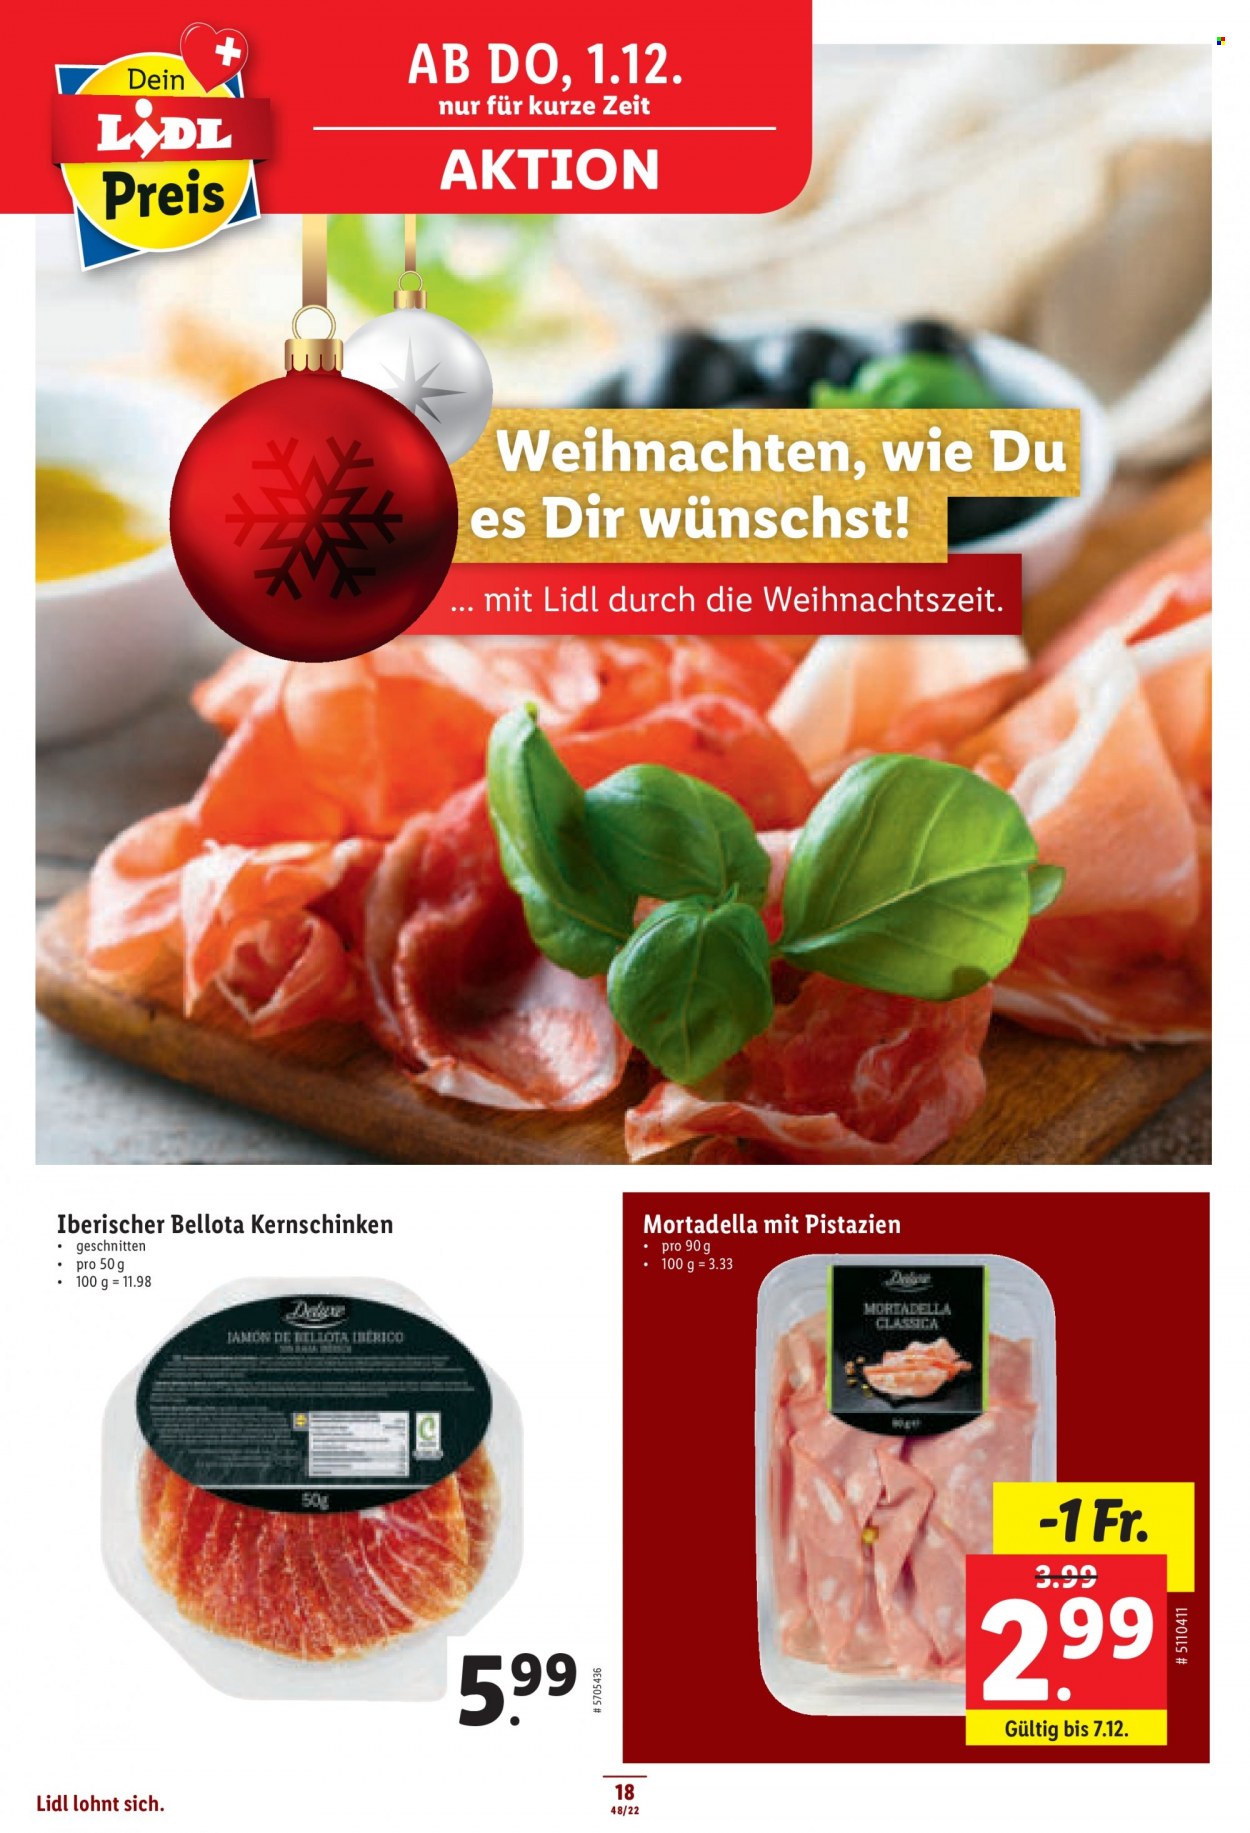 Catalogue Lidl - 1.12.2022 - 7.12.2022. Page 18.